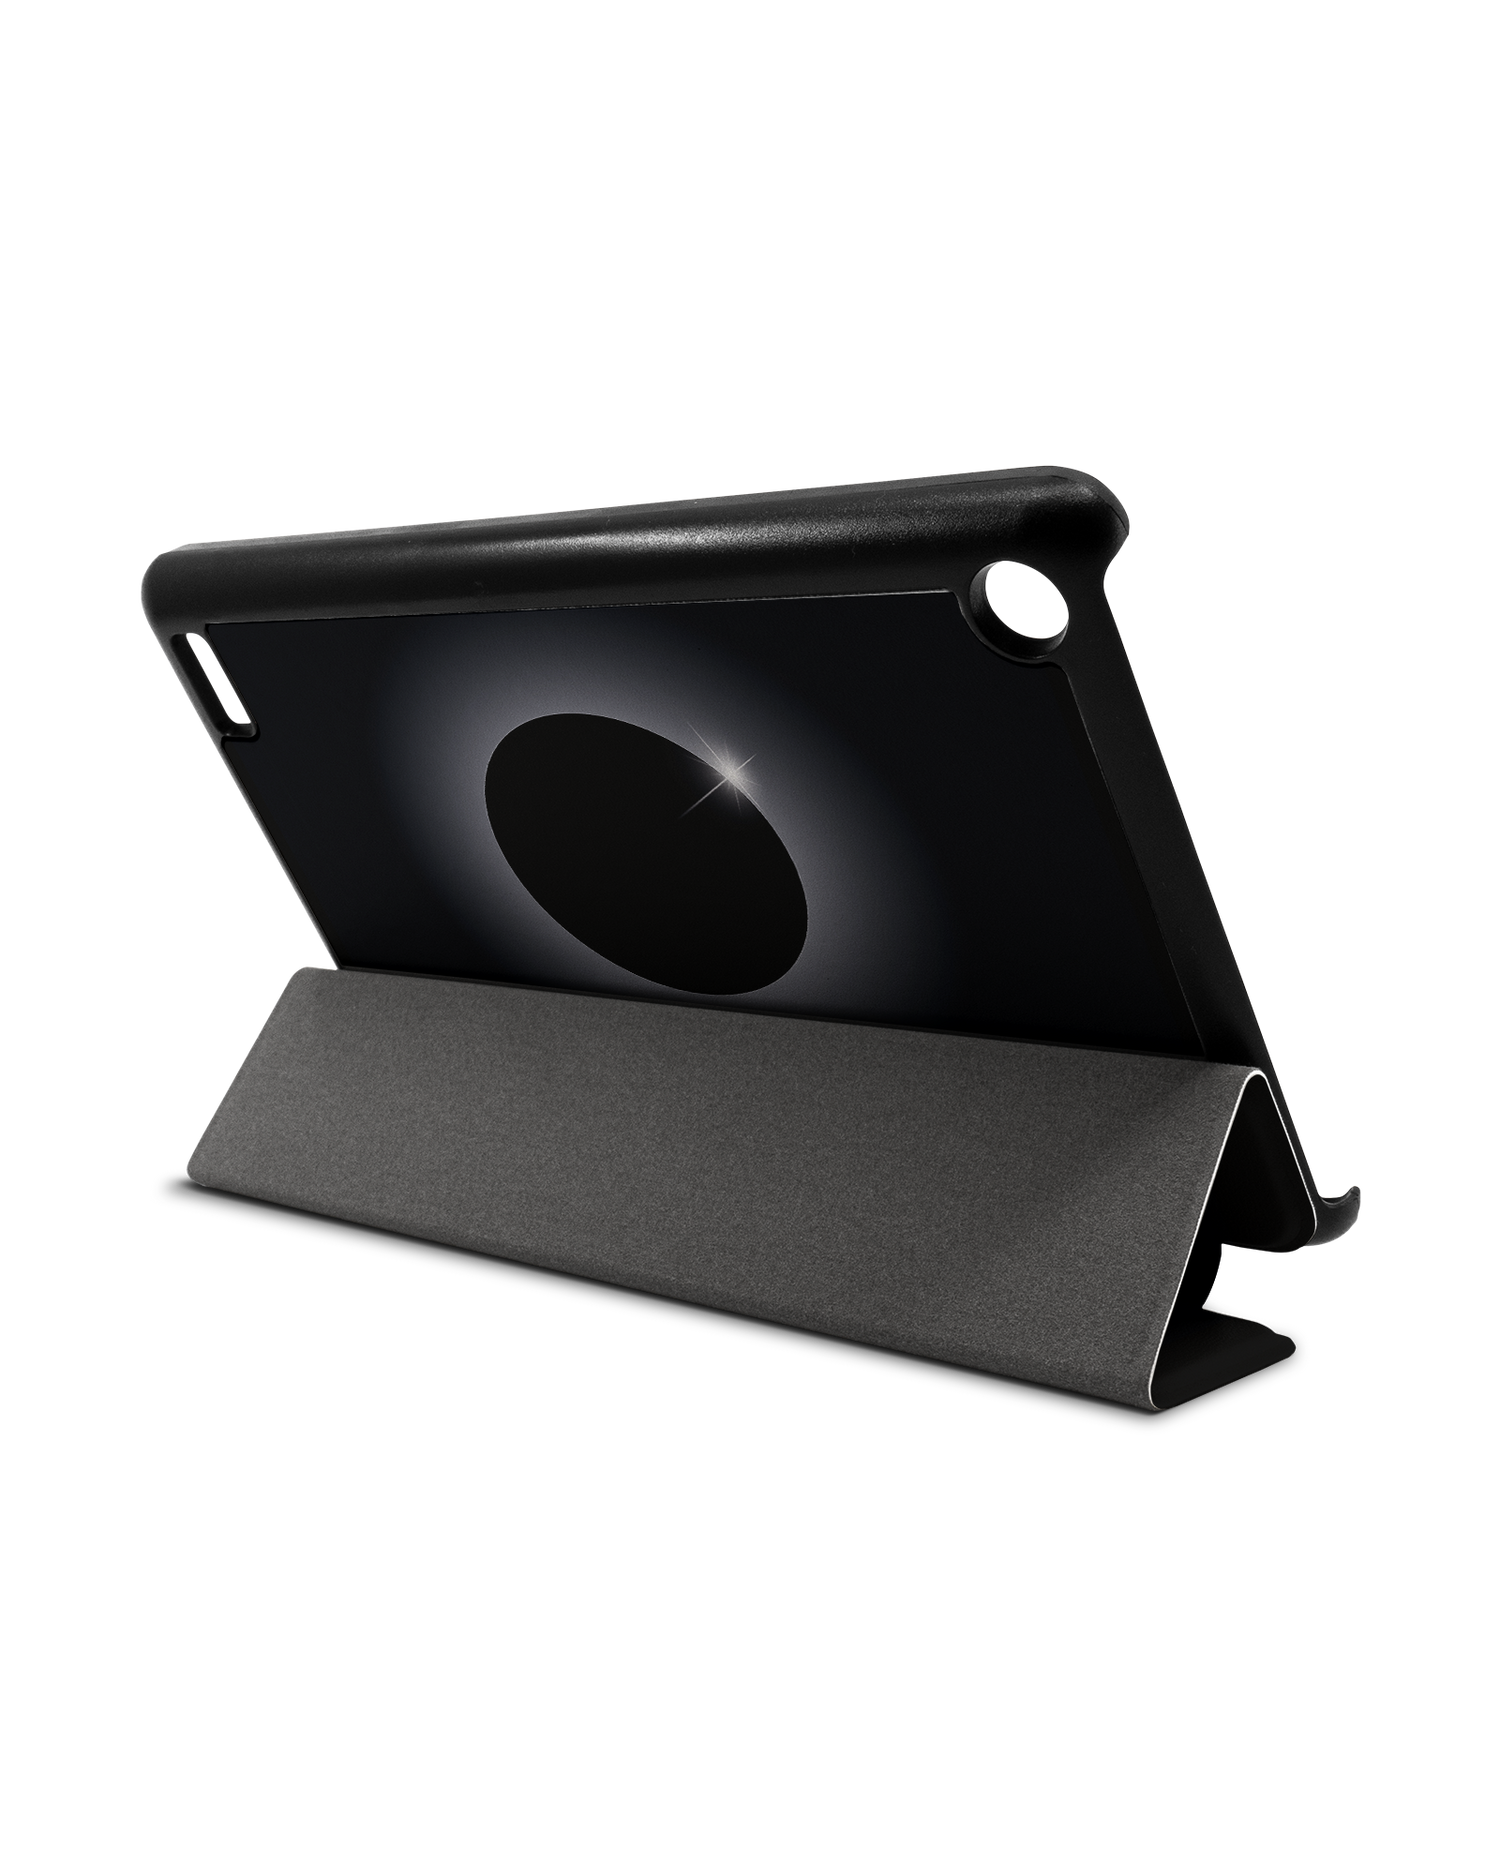 Eclipse Tablet Smart Case for Amazon Fire 7: Used as Stand